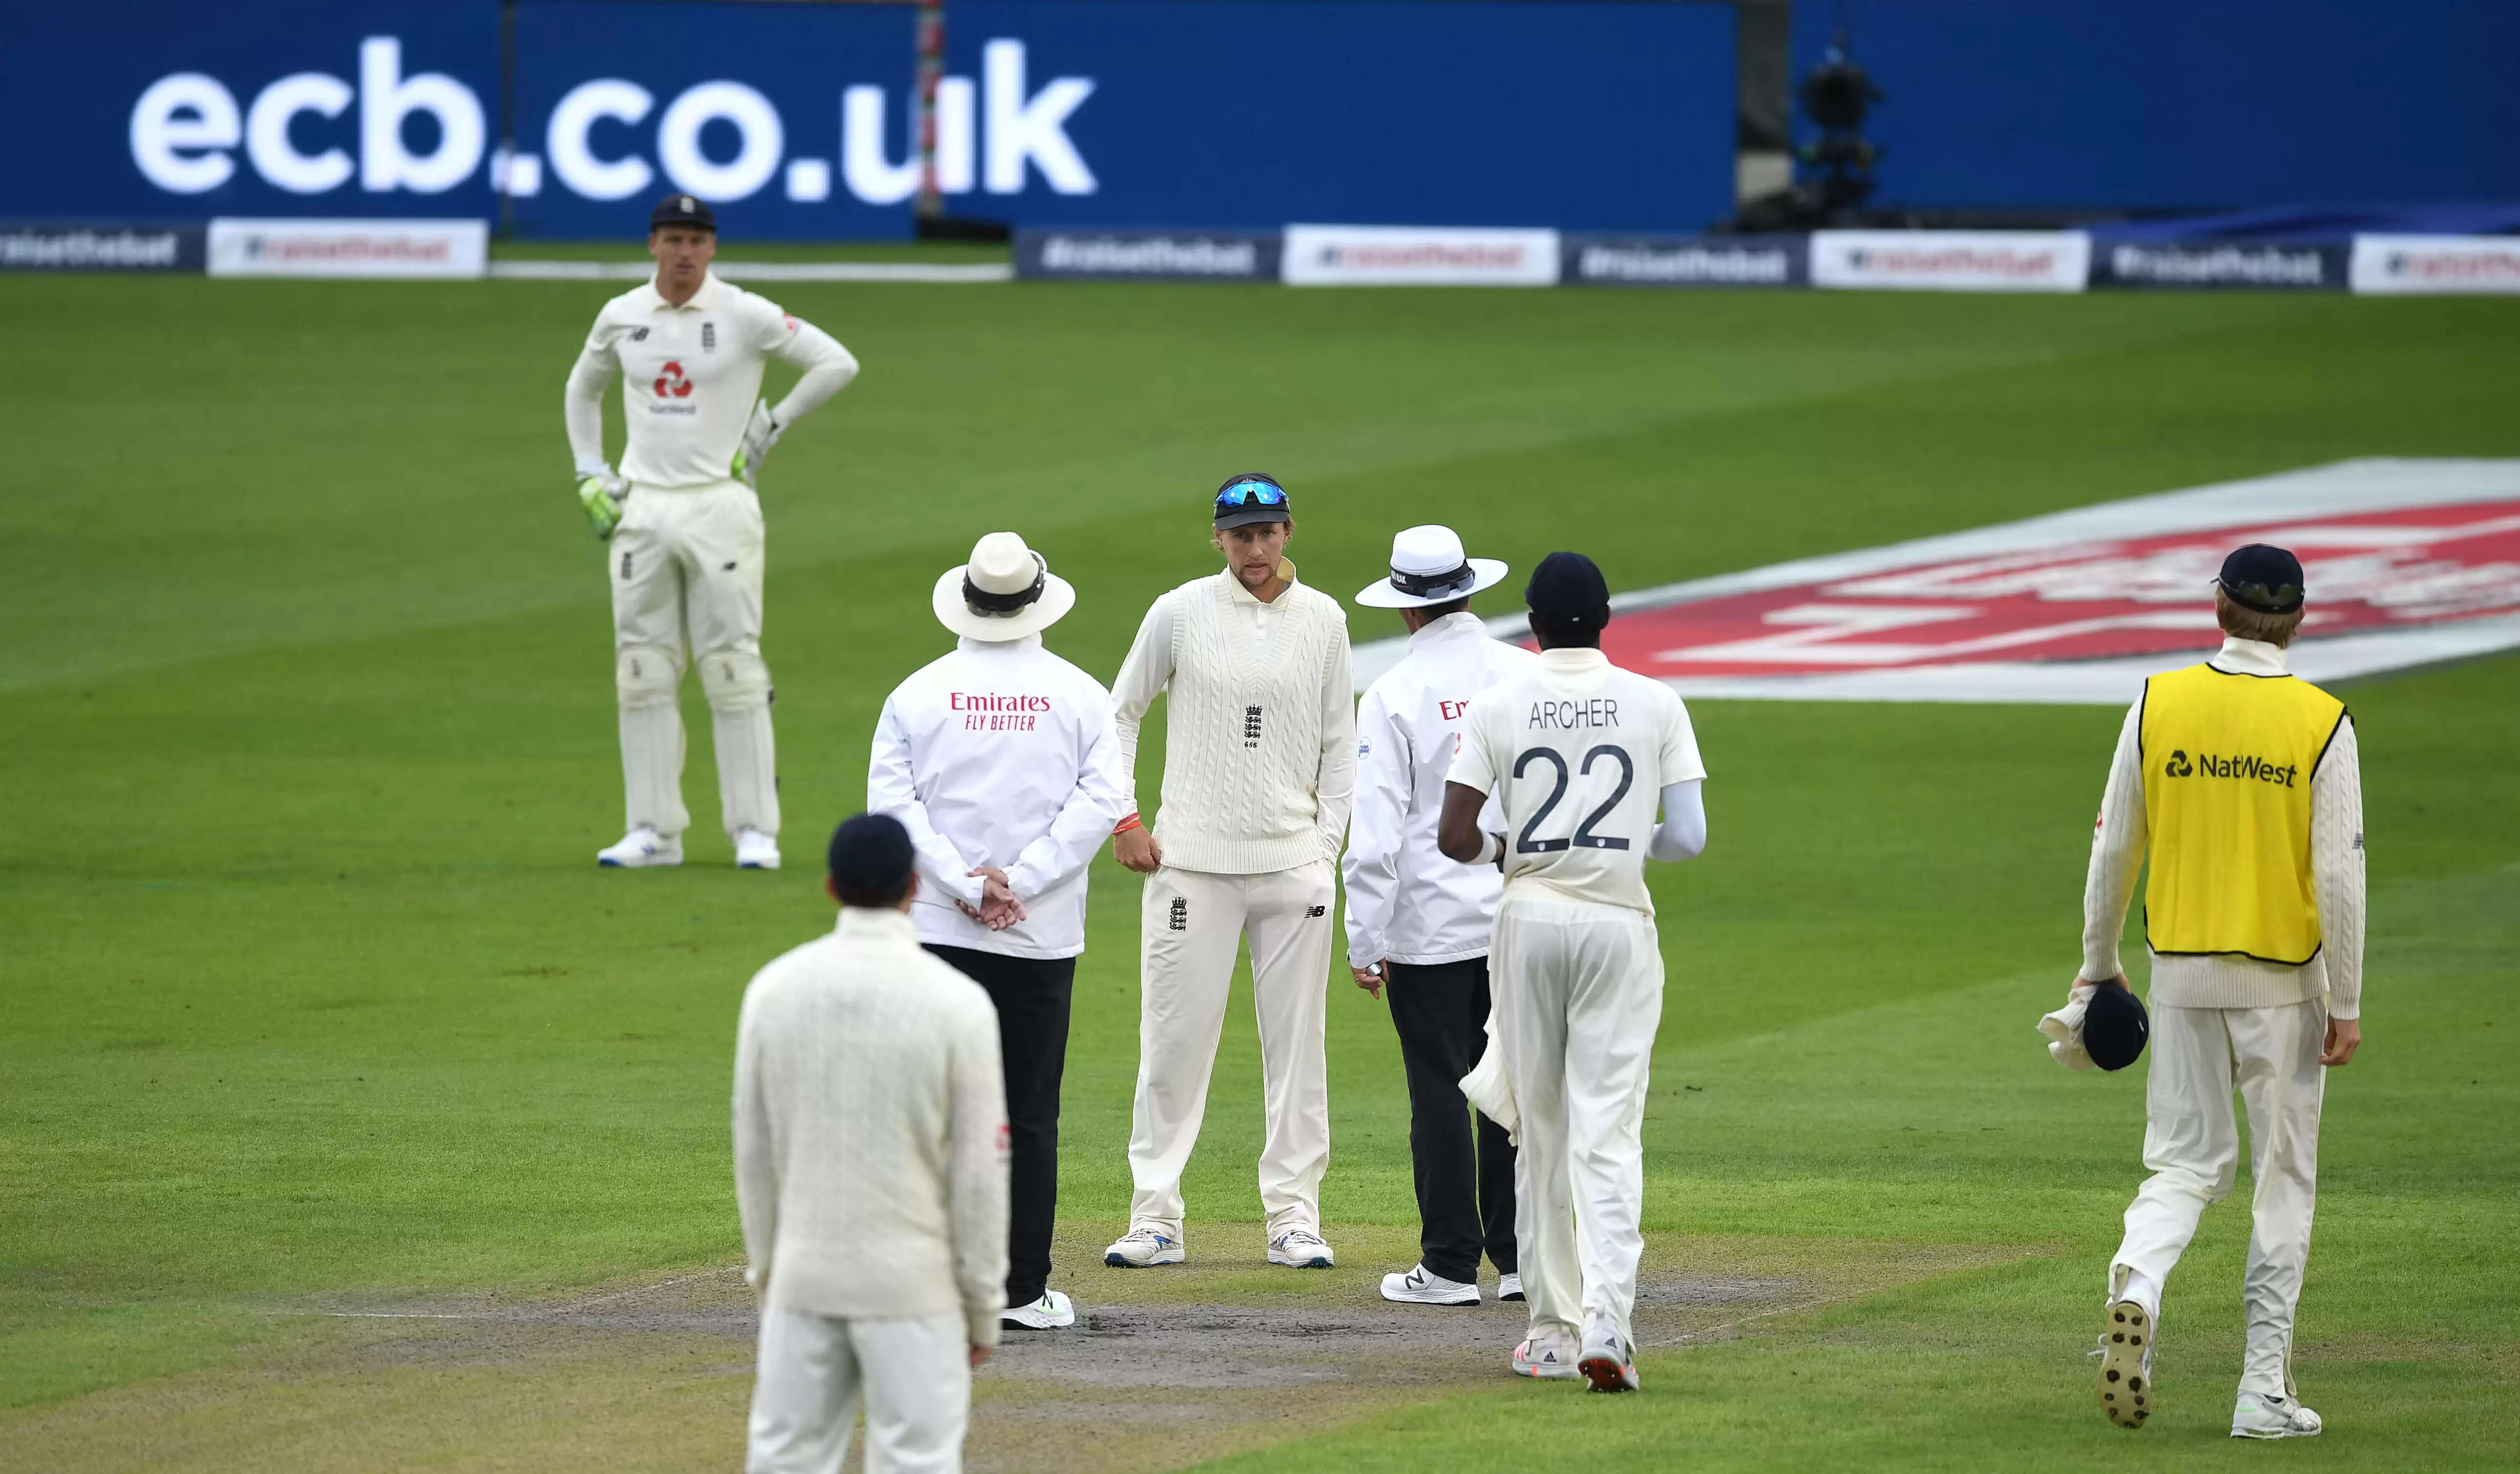 England v Pakistan, 1st Test, Day 1: Rain plays spoilsport amidst exciting day’s play